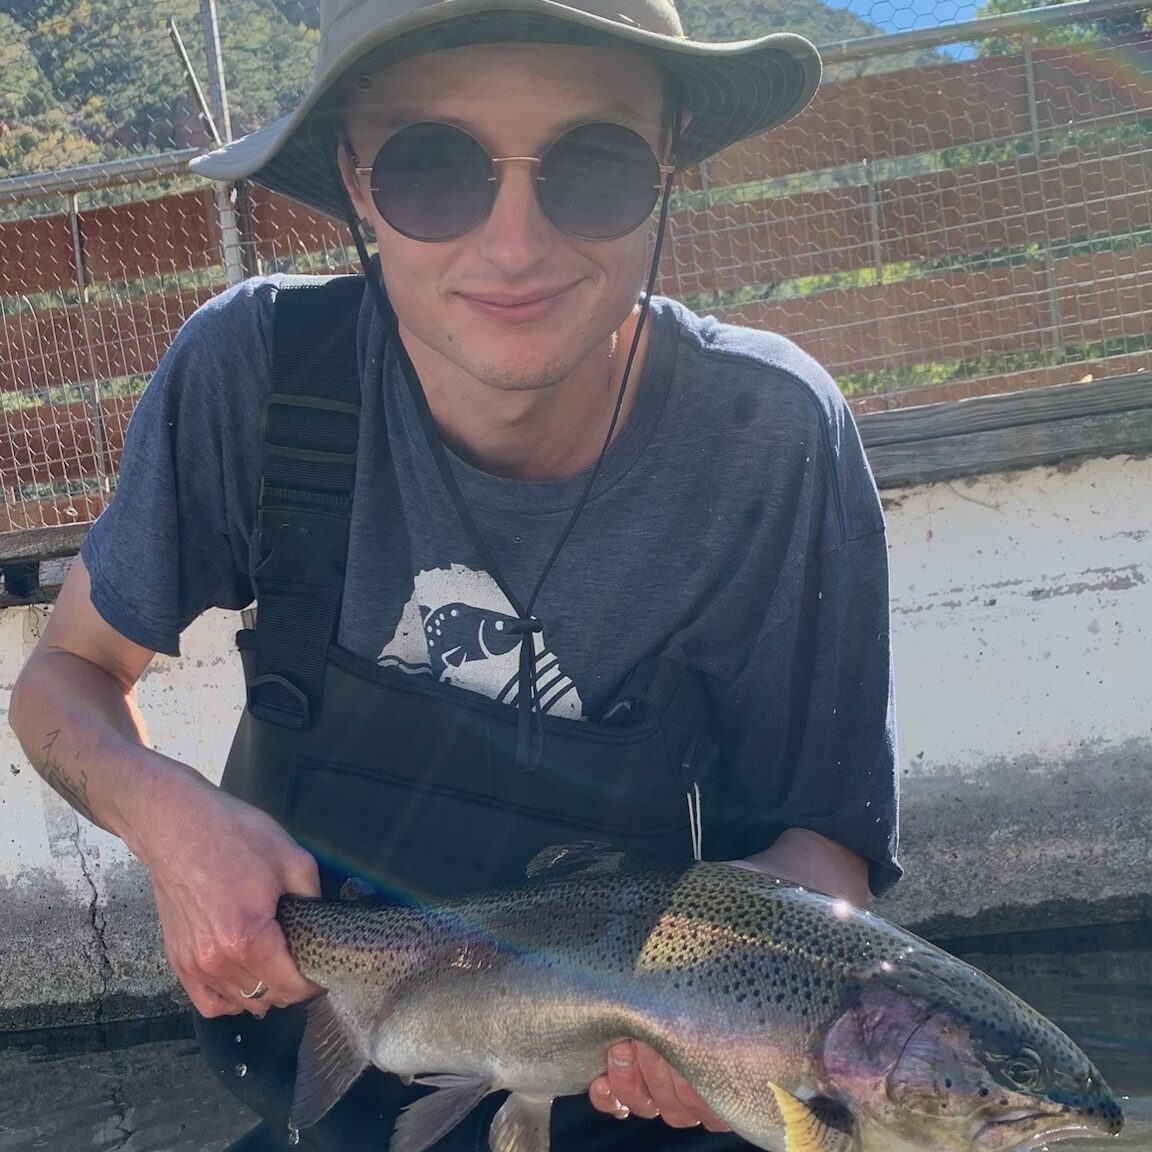 Sedona Trout in hands